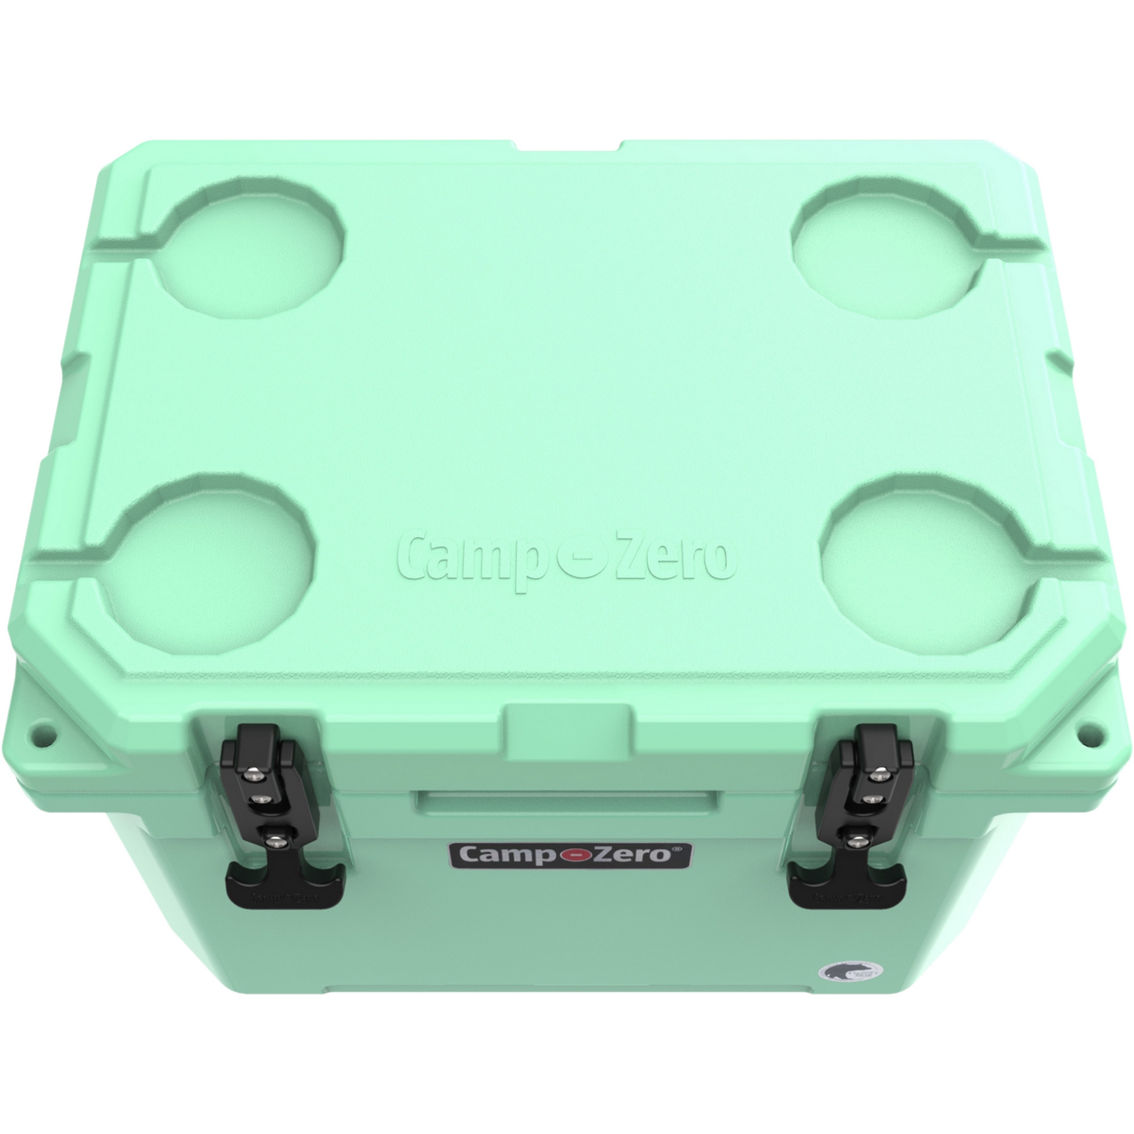 CAMP-ZERO 20L 21 qt. Premium Cooler with Four Molded In Beverage Holders - Image 5 of 7